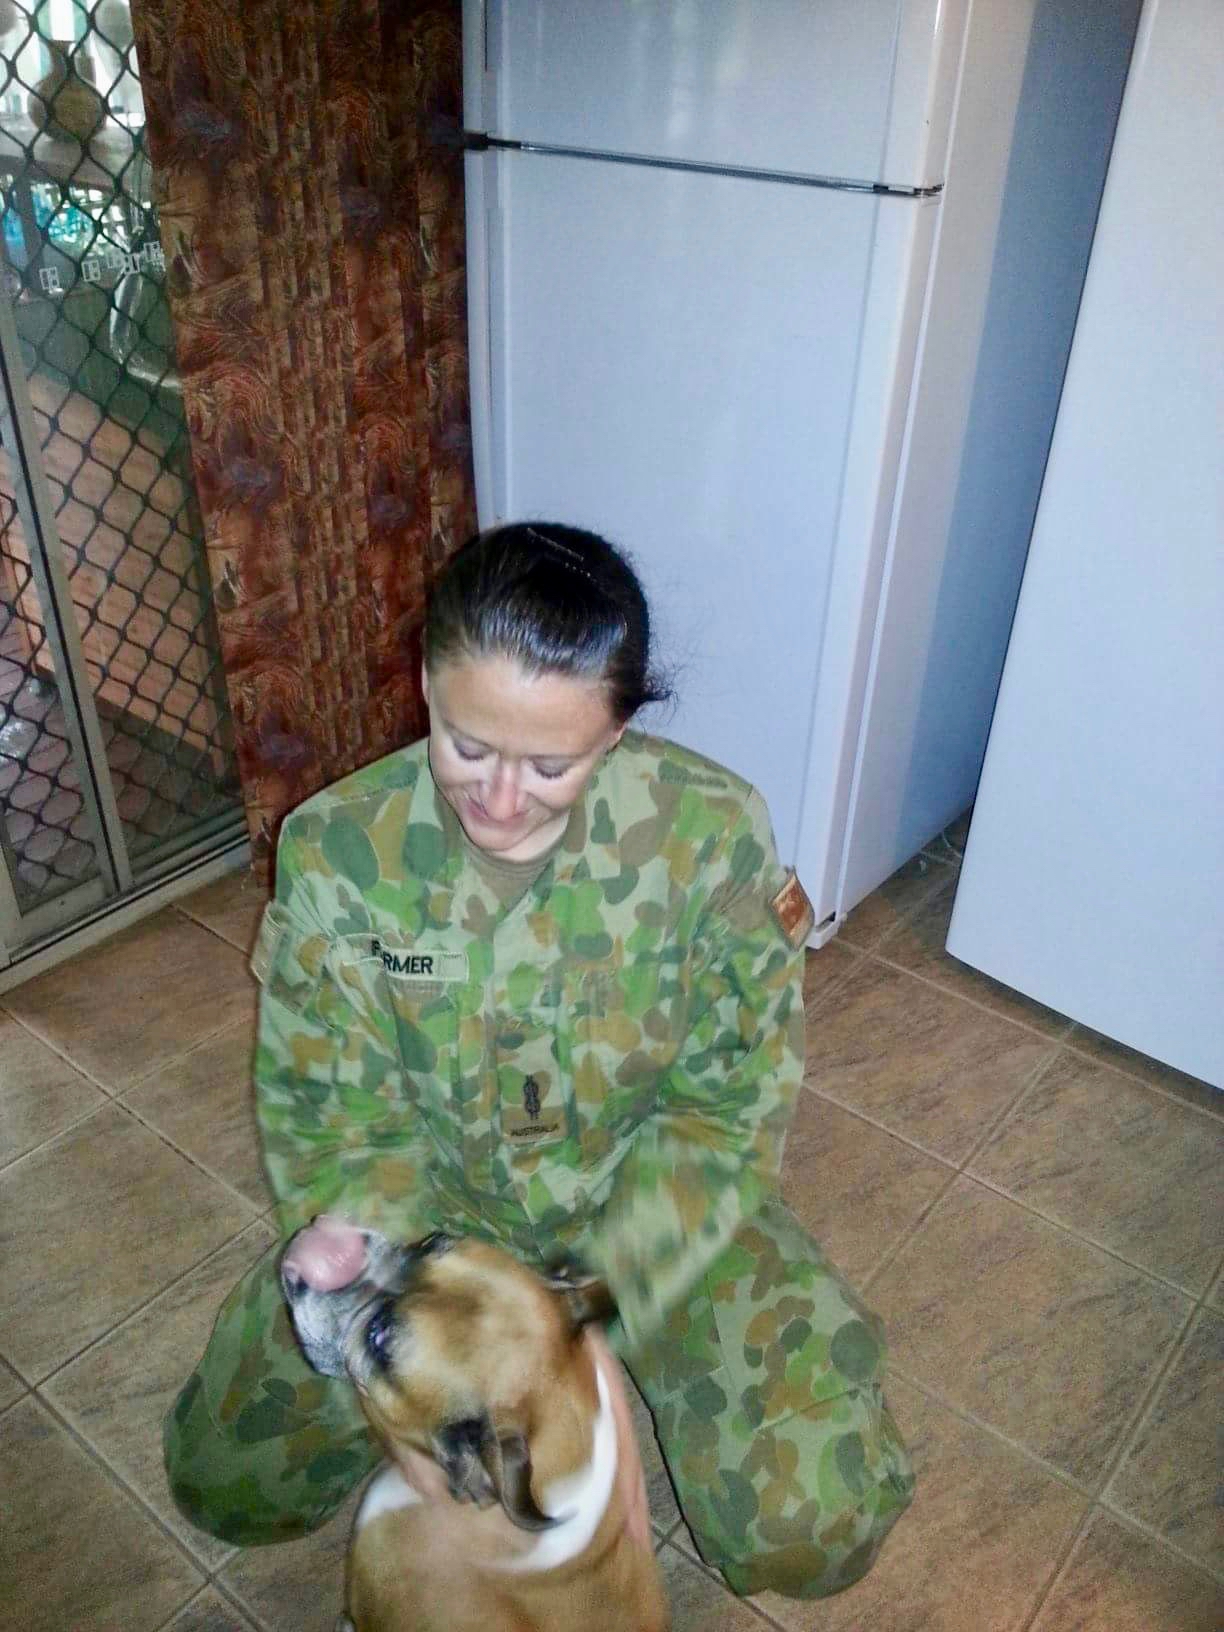 PIC 20    2013 – AUSTRALIA – Day I landed back in Australia from overseas, my M&D took me home (Narangba, Brisbane) to get changed before I had to catch a connecting flight to Cairns (home) and that’s my dog, Kira.jpg